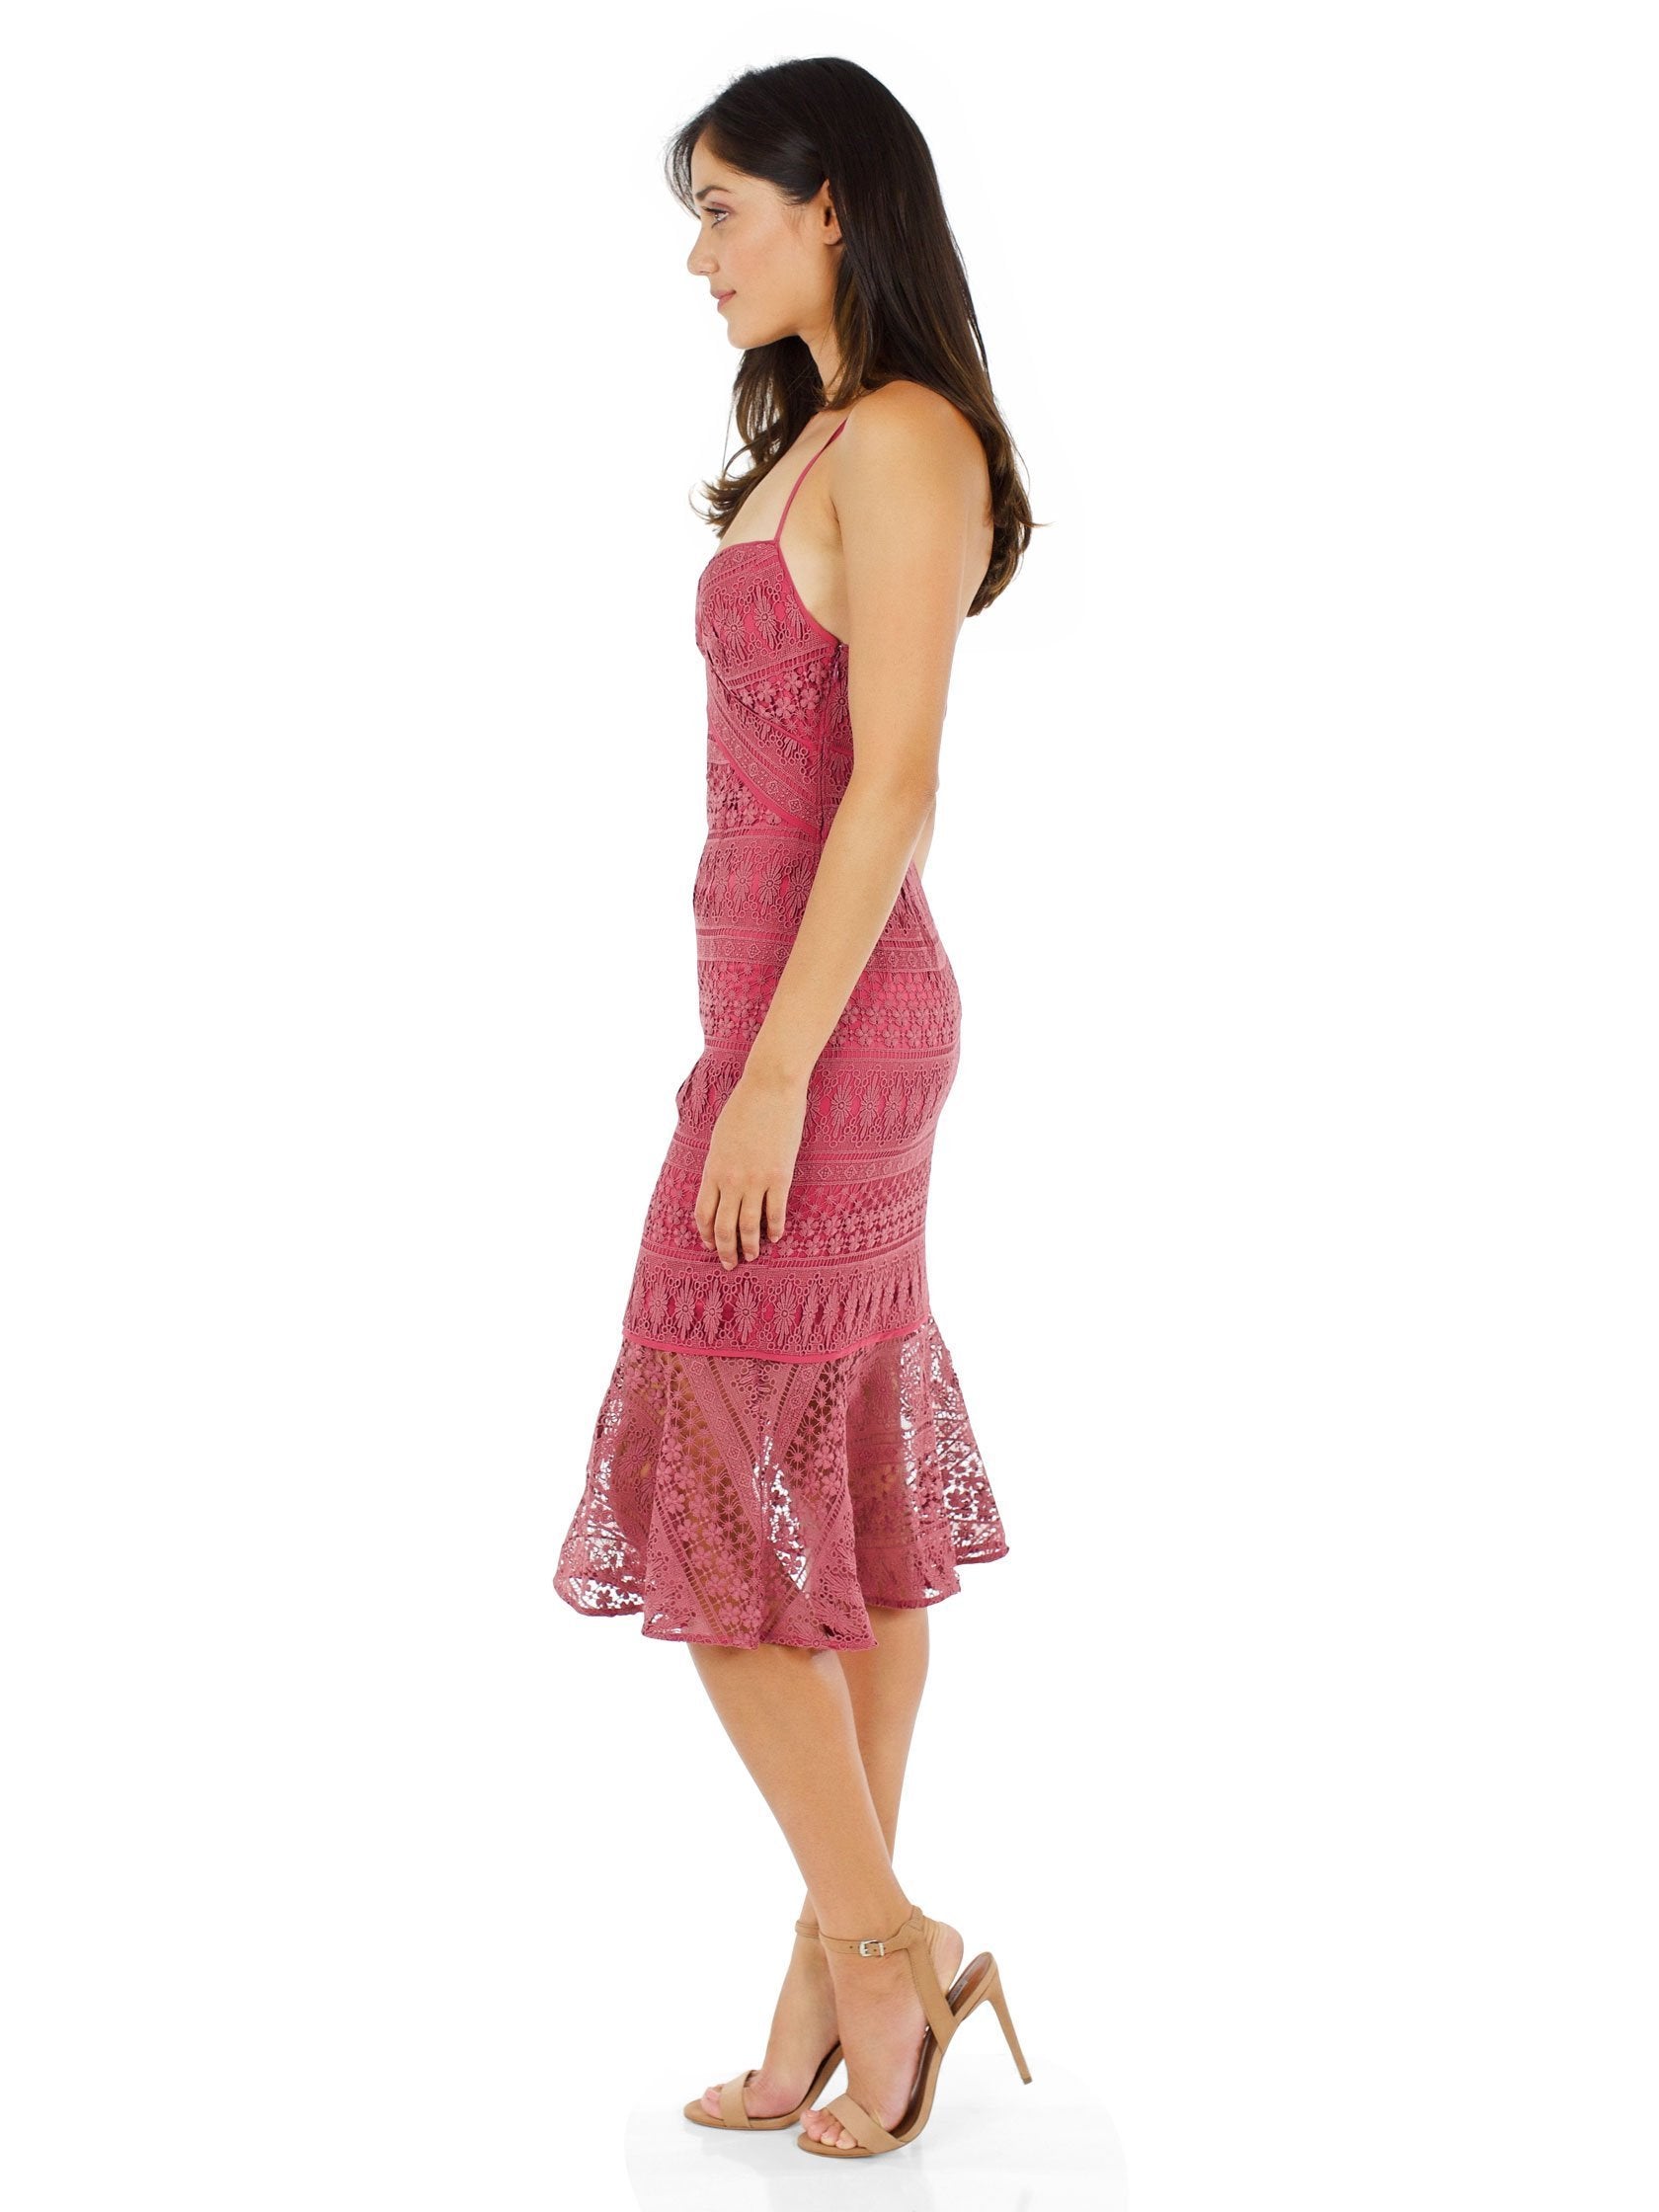 Woman wearing a dress rental from LIKELY called Darby Dress